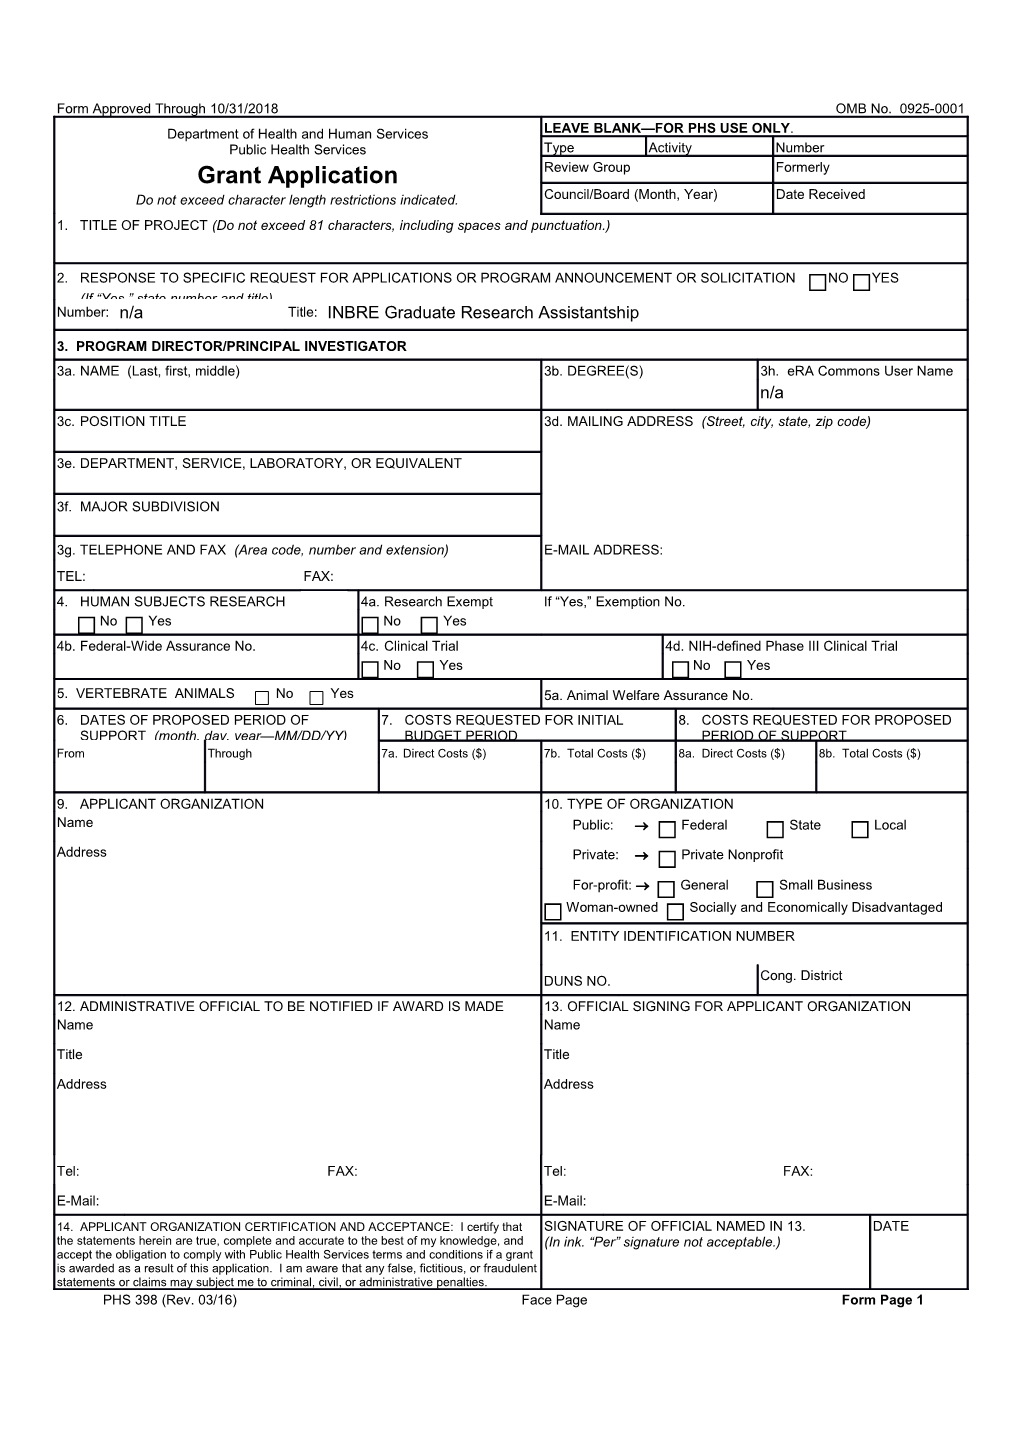 PHS 398 (Rev. 08/12), OMB No. 0925-0001, Face Page, Form Page 1